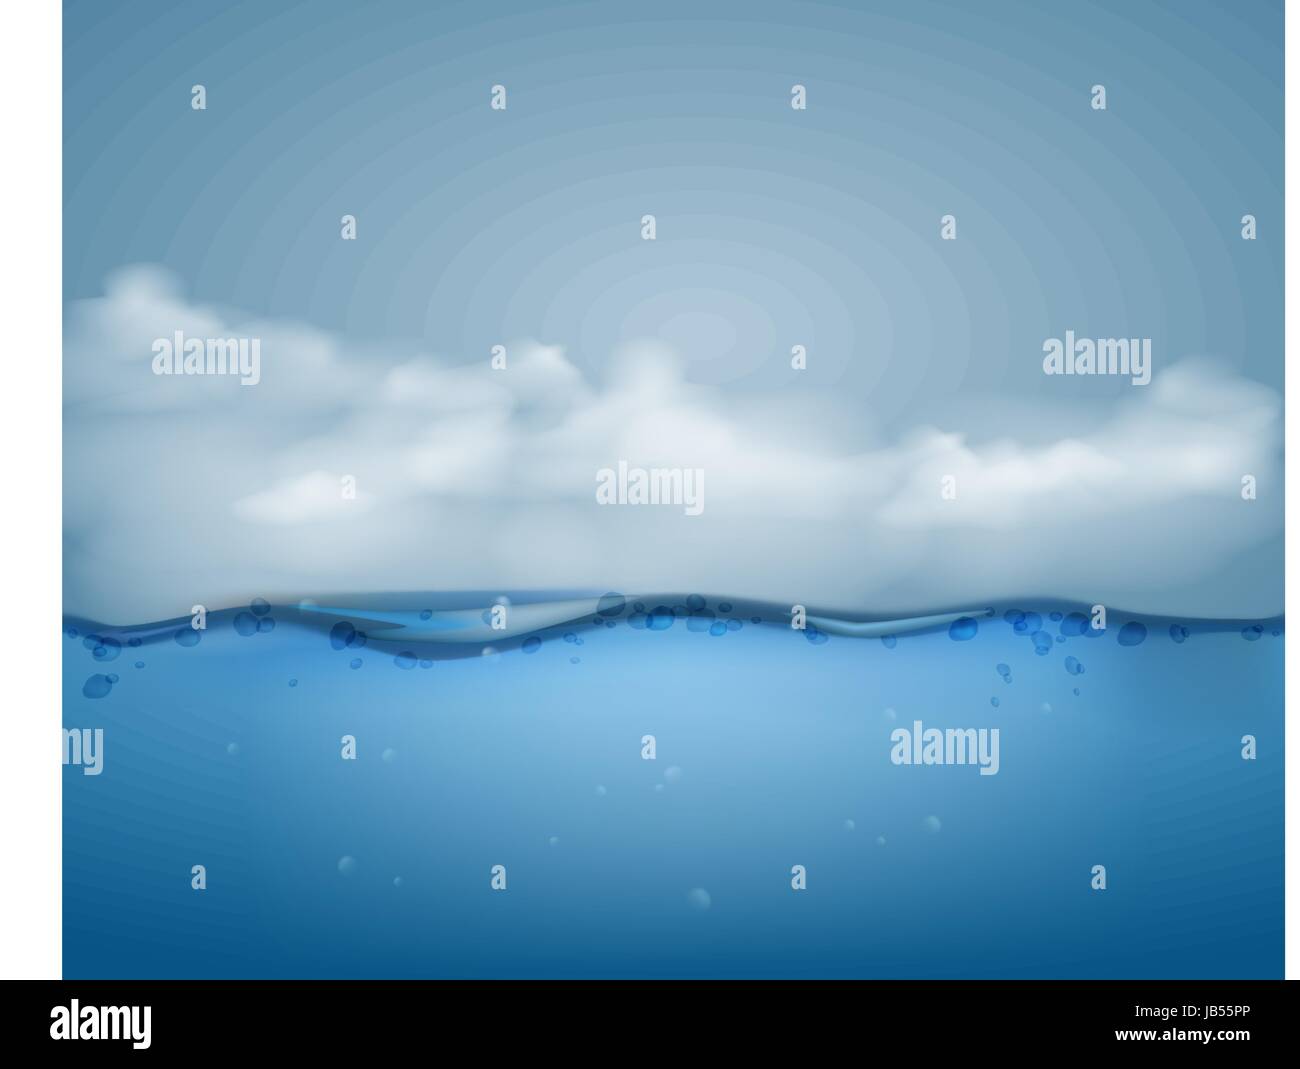 Underwater part and clouds.vector illustration Stock Vector